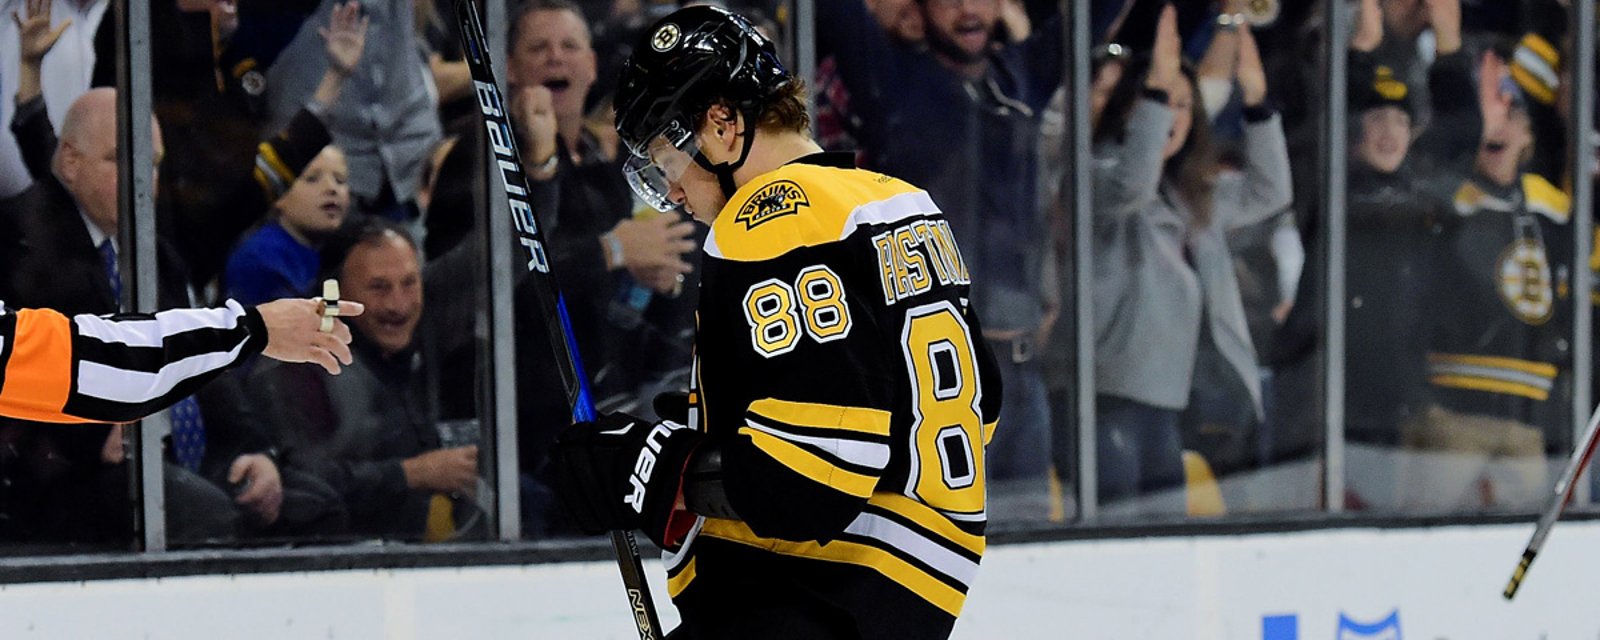 Must see: Goal of the Night - David Pastrnak